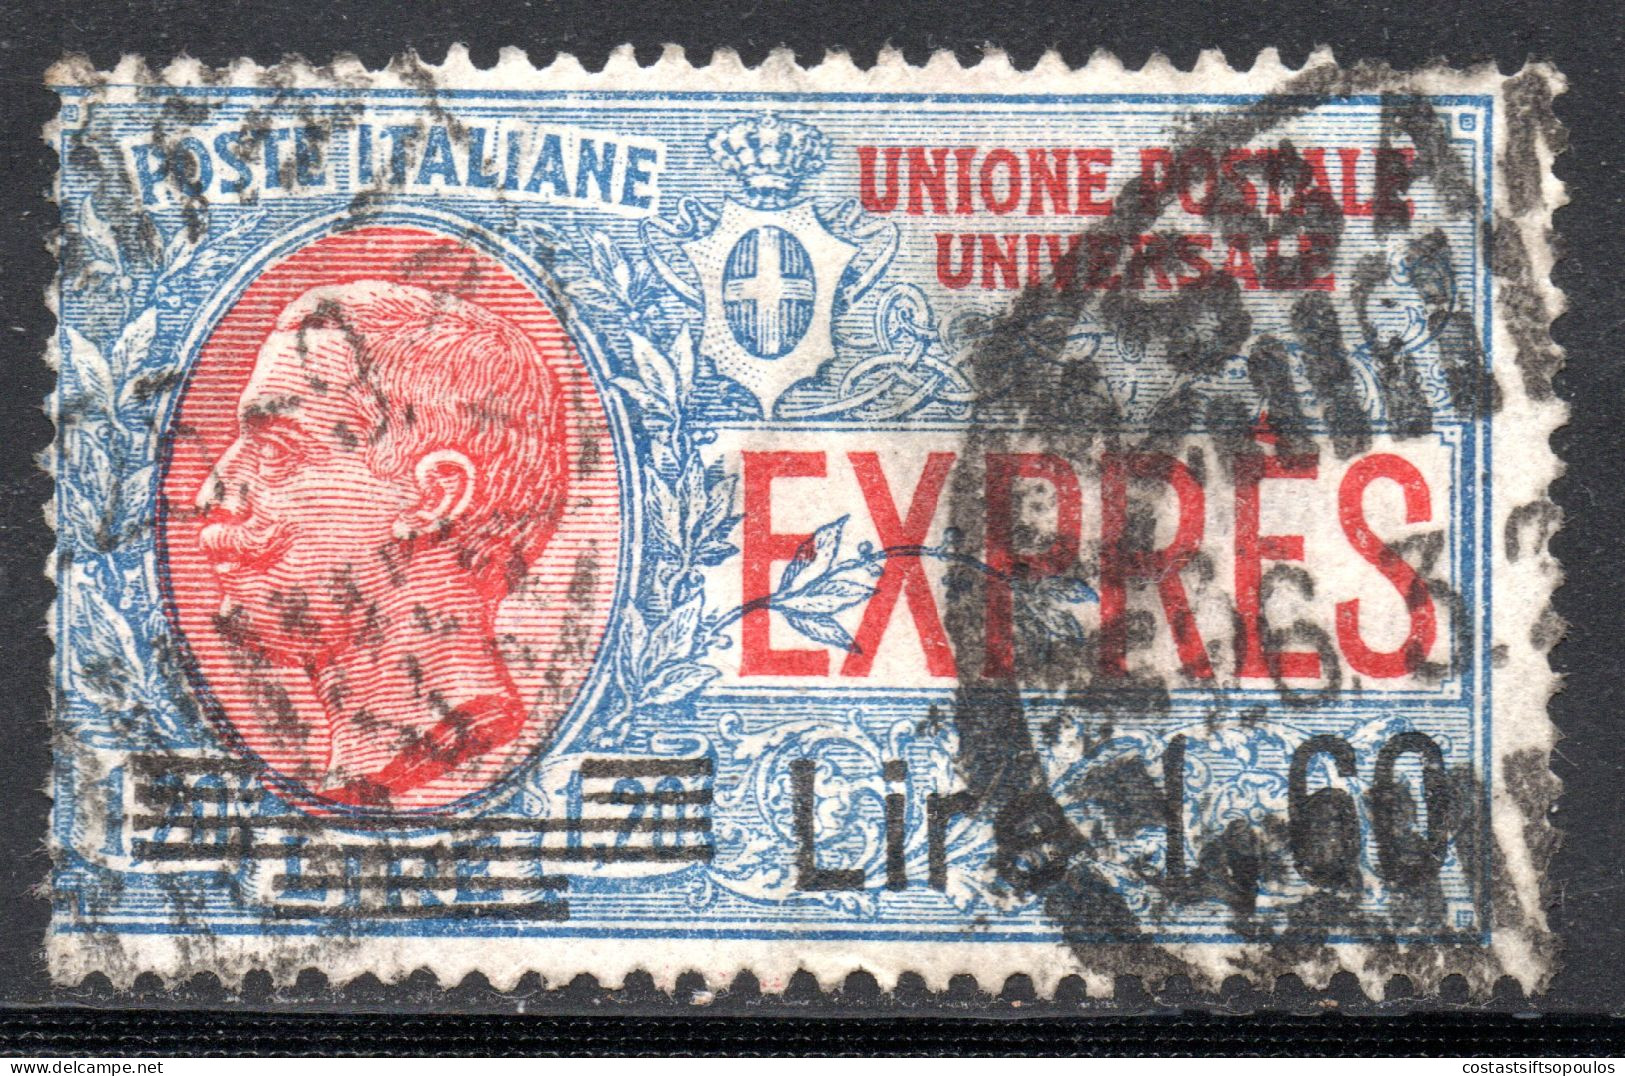 2150. ITALY 1924 SPECIAL DELIVERY SC. E12 - Express Mail